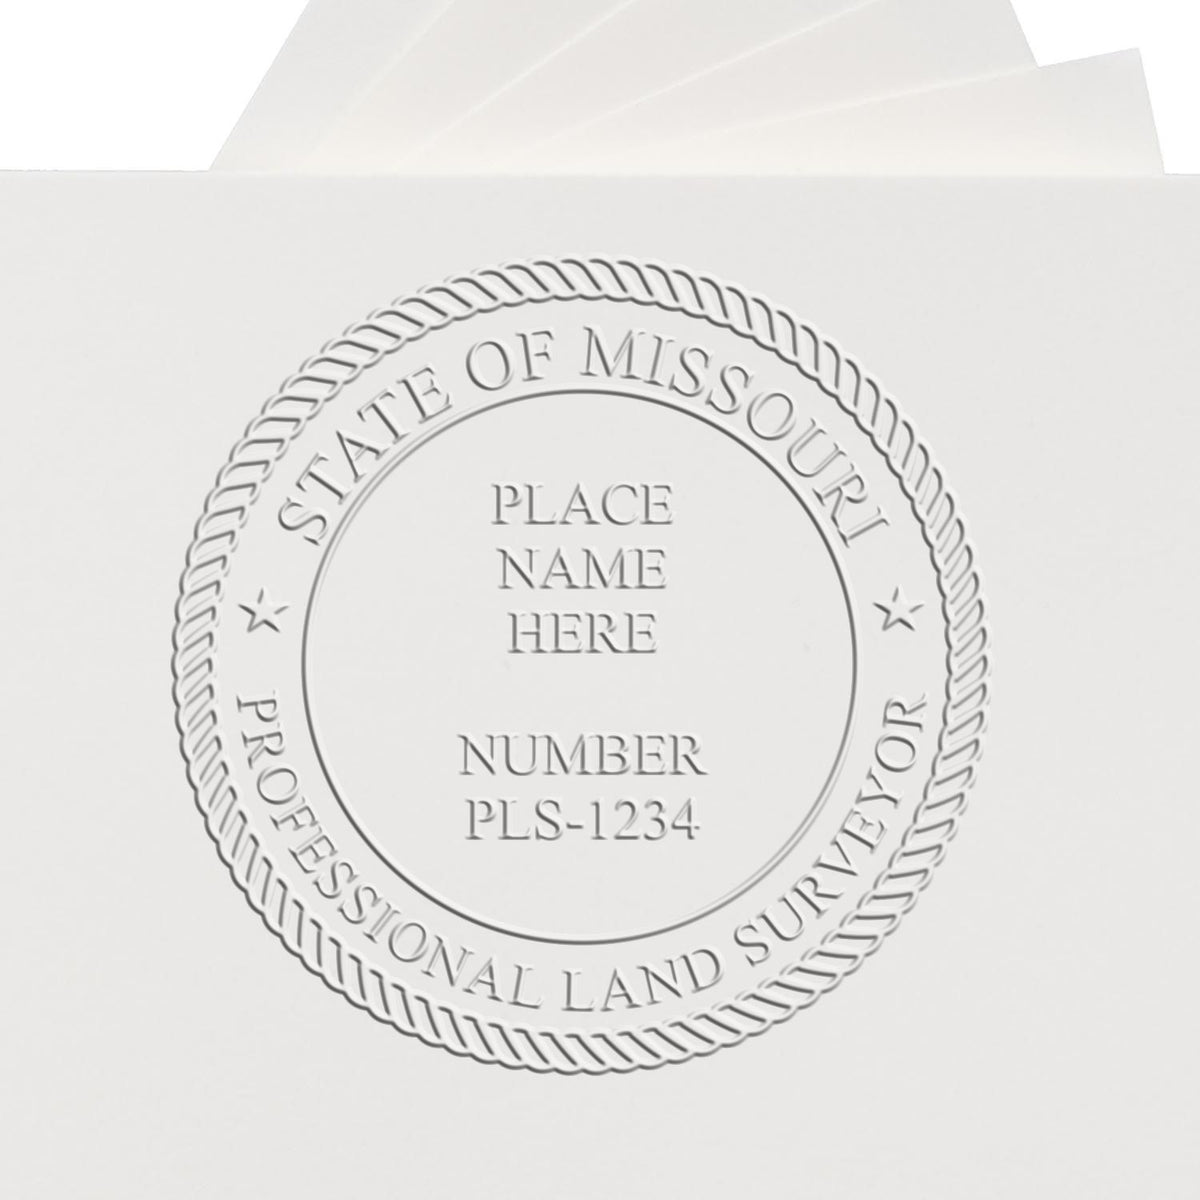 Another Example of a stamped impression of the Heavy Duty Cast Iron Missouri Land Surveyor Seal Embosser on a piece of office paper.